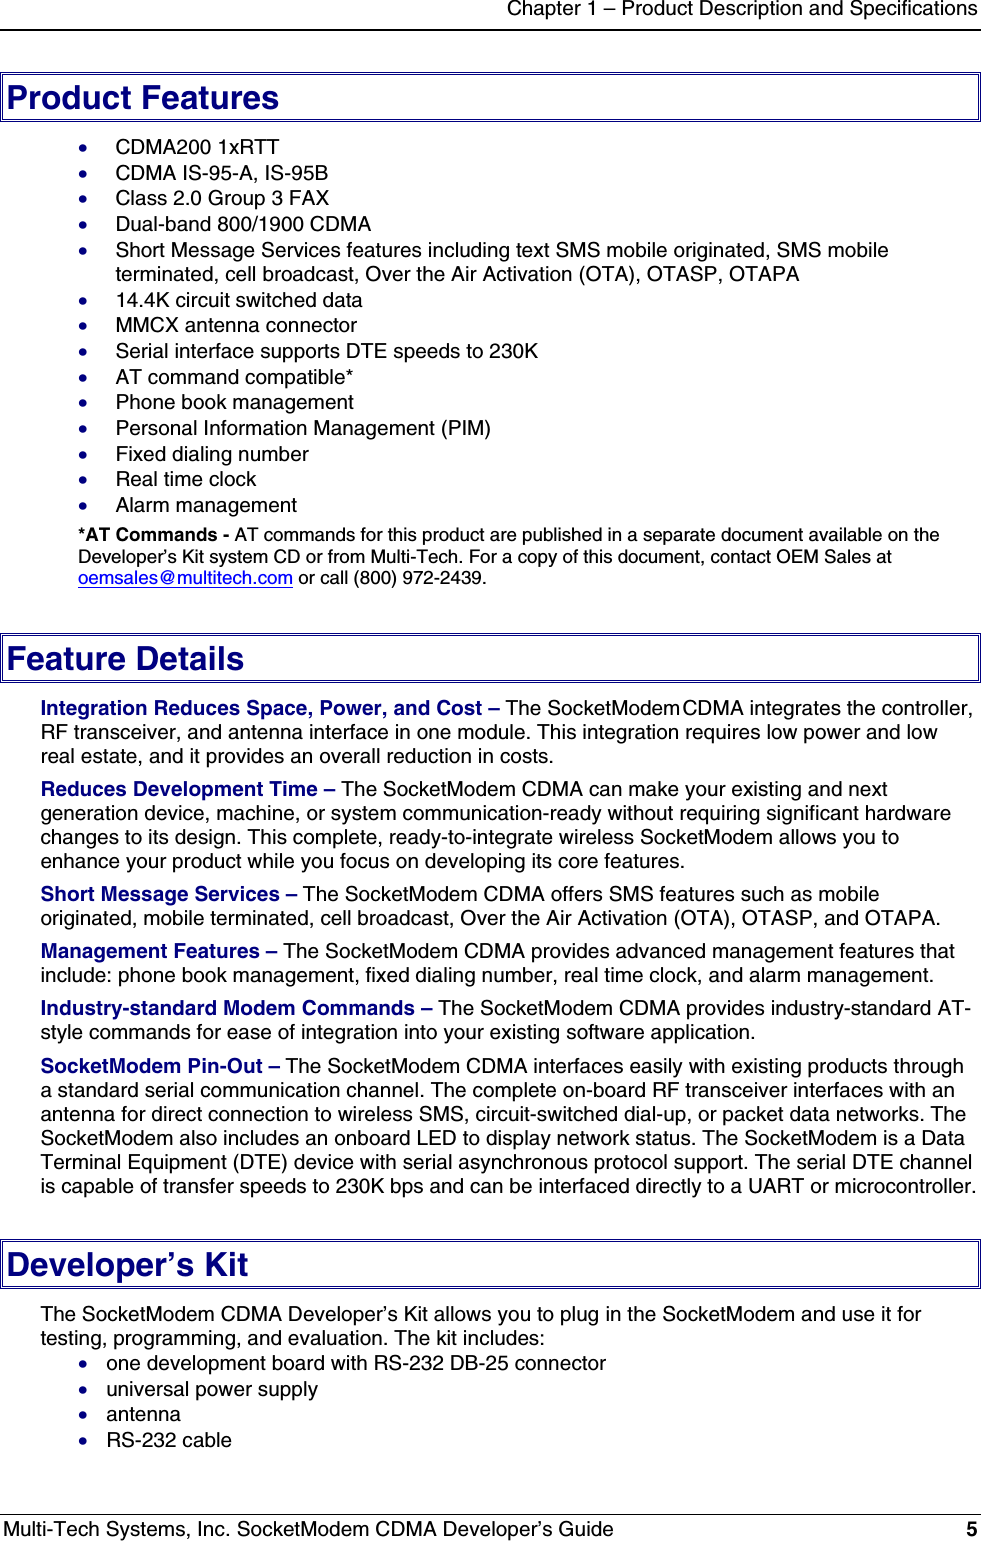 Chapter 1 – Product Description and SpecificationsMulti-Tech Systems, Inc. SocketModem CDMA Developer’s Guide 5Product Features· CDMA200 1xRTT· CDMA IS-95-A, IS-95B· Class 2.0 Group 3 FAX· Dual-band 800/1900 CDMA· Short Message Services features including text SMS mobile originated, SMS mobileterminated, cell broadcast, Over the Air Activation (OTA), OTASP, OTAPA· 14.4K circuit switched data· MMCX antenna connector· Serial interface supports DTE speeds to 230K· AT command compatible*· Phone book management· Personal Information Management (PIM)· Fixed dialing number· Real time clock· Alarm management*AT Commands - AT commands for this product are published in a separate document available on theDeveloper’s Kit system CD or from Multi-Tech. For a copy of this document, contact OEM Sales atoemsales@multitech.com or call (800) 972-2439.Feature DetailsIntegration Reduces Space, Power, and Cost – The SocketModem CDMA integrates the controller,RF transceiver, and antenna interface in one module. This integration requires low power and lowreal estate, and it provides an overall reduction in costs.Reduces Development Time – The SocketModem CDMA can make your existing and nextgeneration device, machine, or system communication-ready without requiring significant hardwarechanges to its design. This complete, ready-to-integrate wireless SocketModem allows you toenhance your product while you focus on developing its core features.Short Message Services – The SocketModem CDMA offers SMS features such as mobileoriginated, mobile terminated, cell broadcast, Over the Air Activation (OTA), OTASP, and OTAPA.Management Features – The SocketModem CDMA provides advanced management features thatinclude: phone book management, fixed dialing number, real time clock, and alarm management.Industry-standard Modem Commands – The SocketModem CDMA provides industry-standard AT-style commands for ease of integration into your existing software application.SocketModem Pin-Out – The SocketModem CDMA interfaces easily with existing products througha standard serial communication channel. The complete on-board RF transceiver interfaces with anantenna for direct connection to wireless SMS, circuit-switched dial-up, or packet data networks. TheSocketModem also includes an onboard LED to display network status. The SocketModem is a DataTerminal Equipment (DTE) device with serial asynchronous protocol support. The serial DTE channelis capable of transfer speeds to 230K bps and can be interfaced directly to a UART or microcontroller.Developer’s KitThe SocketModem CDMA Developer’s Kit allows you to plug in the SocketModem and use it fortesting, programming, and evaluation. The kit includes:· one development board with RS-232 DB-25 connector· universal power supply· antenna· RS-232 cable